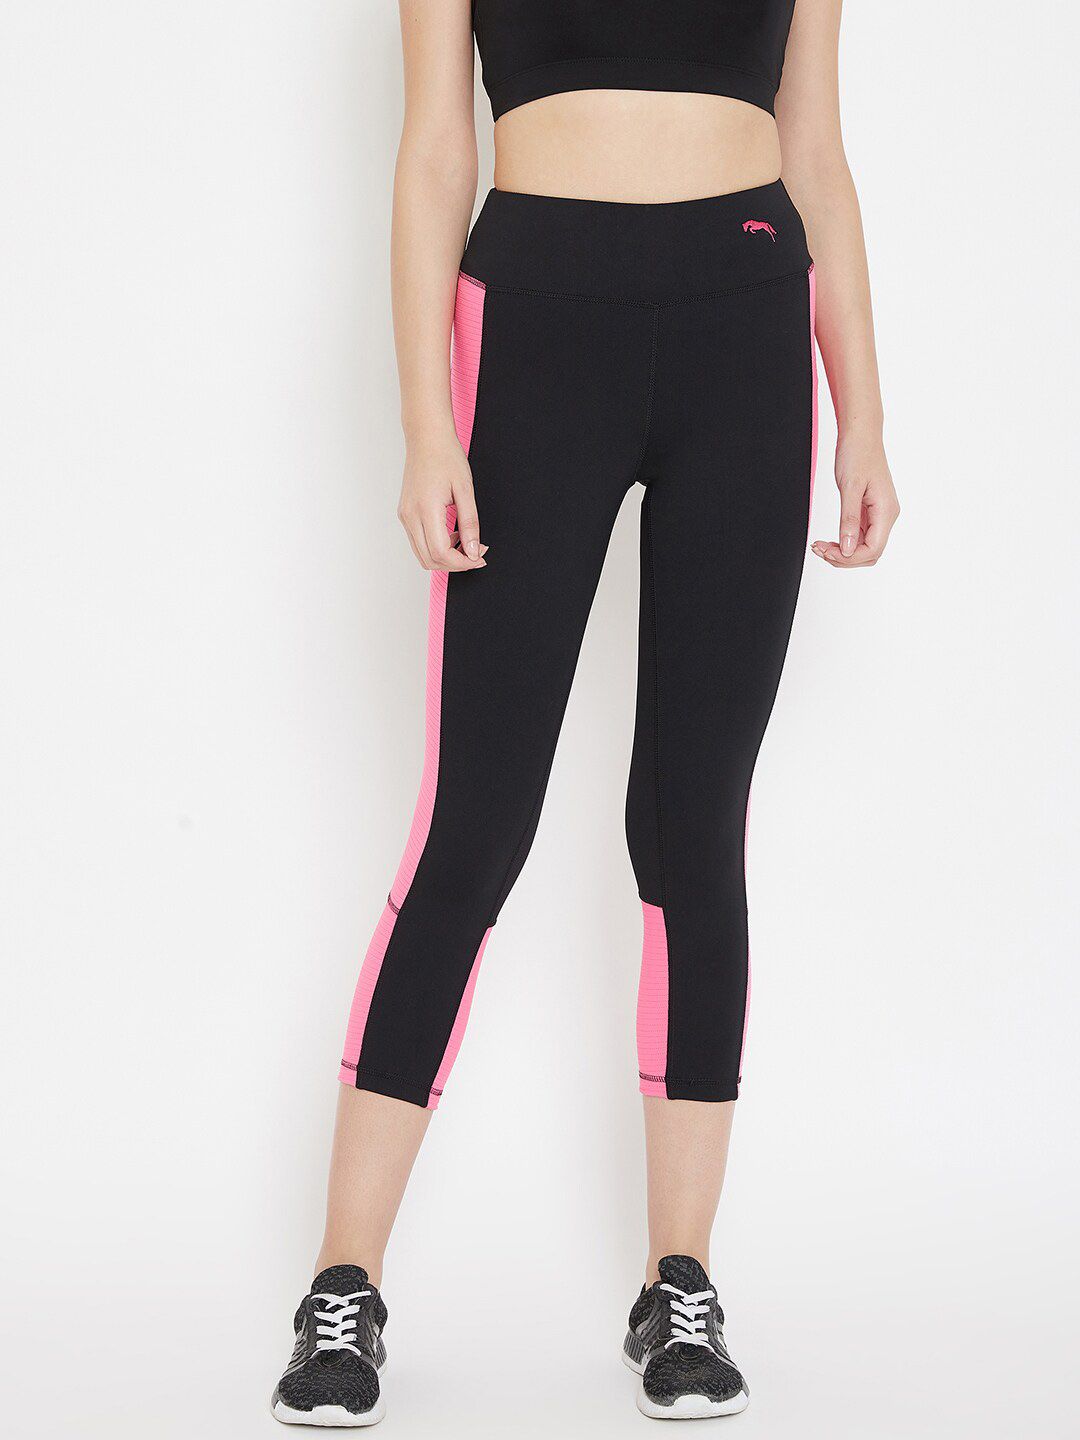 JUMP USA Women Black & Pink Colourblocked Slim-Fit Active Wear Gym Tights Price in India